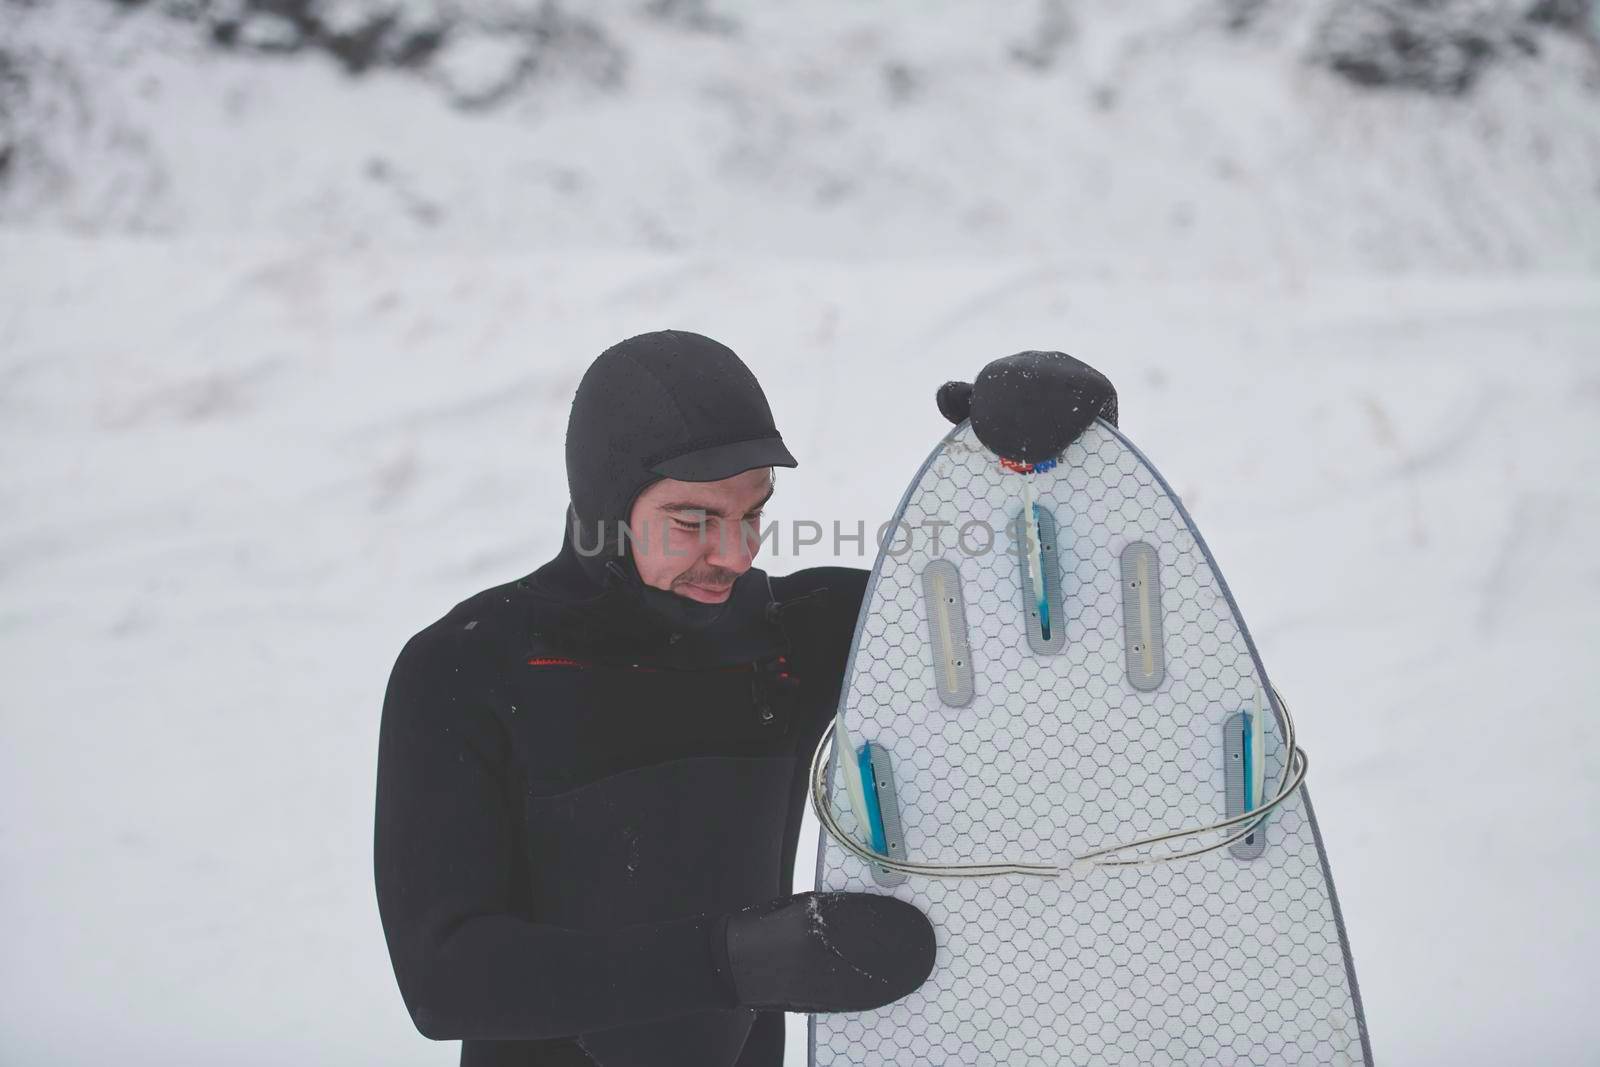 Authentic local Arctic surfer portrait holding a board after surfing in Norwegian sea. Snow capped mountain background. Winter water activities extreme sport